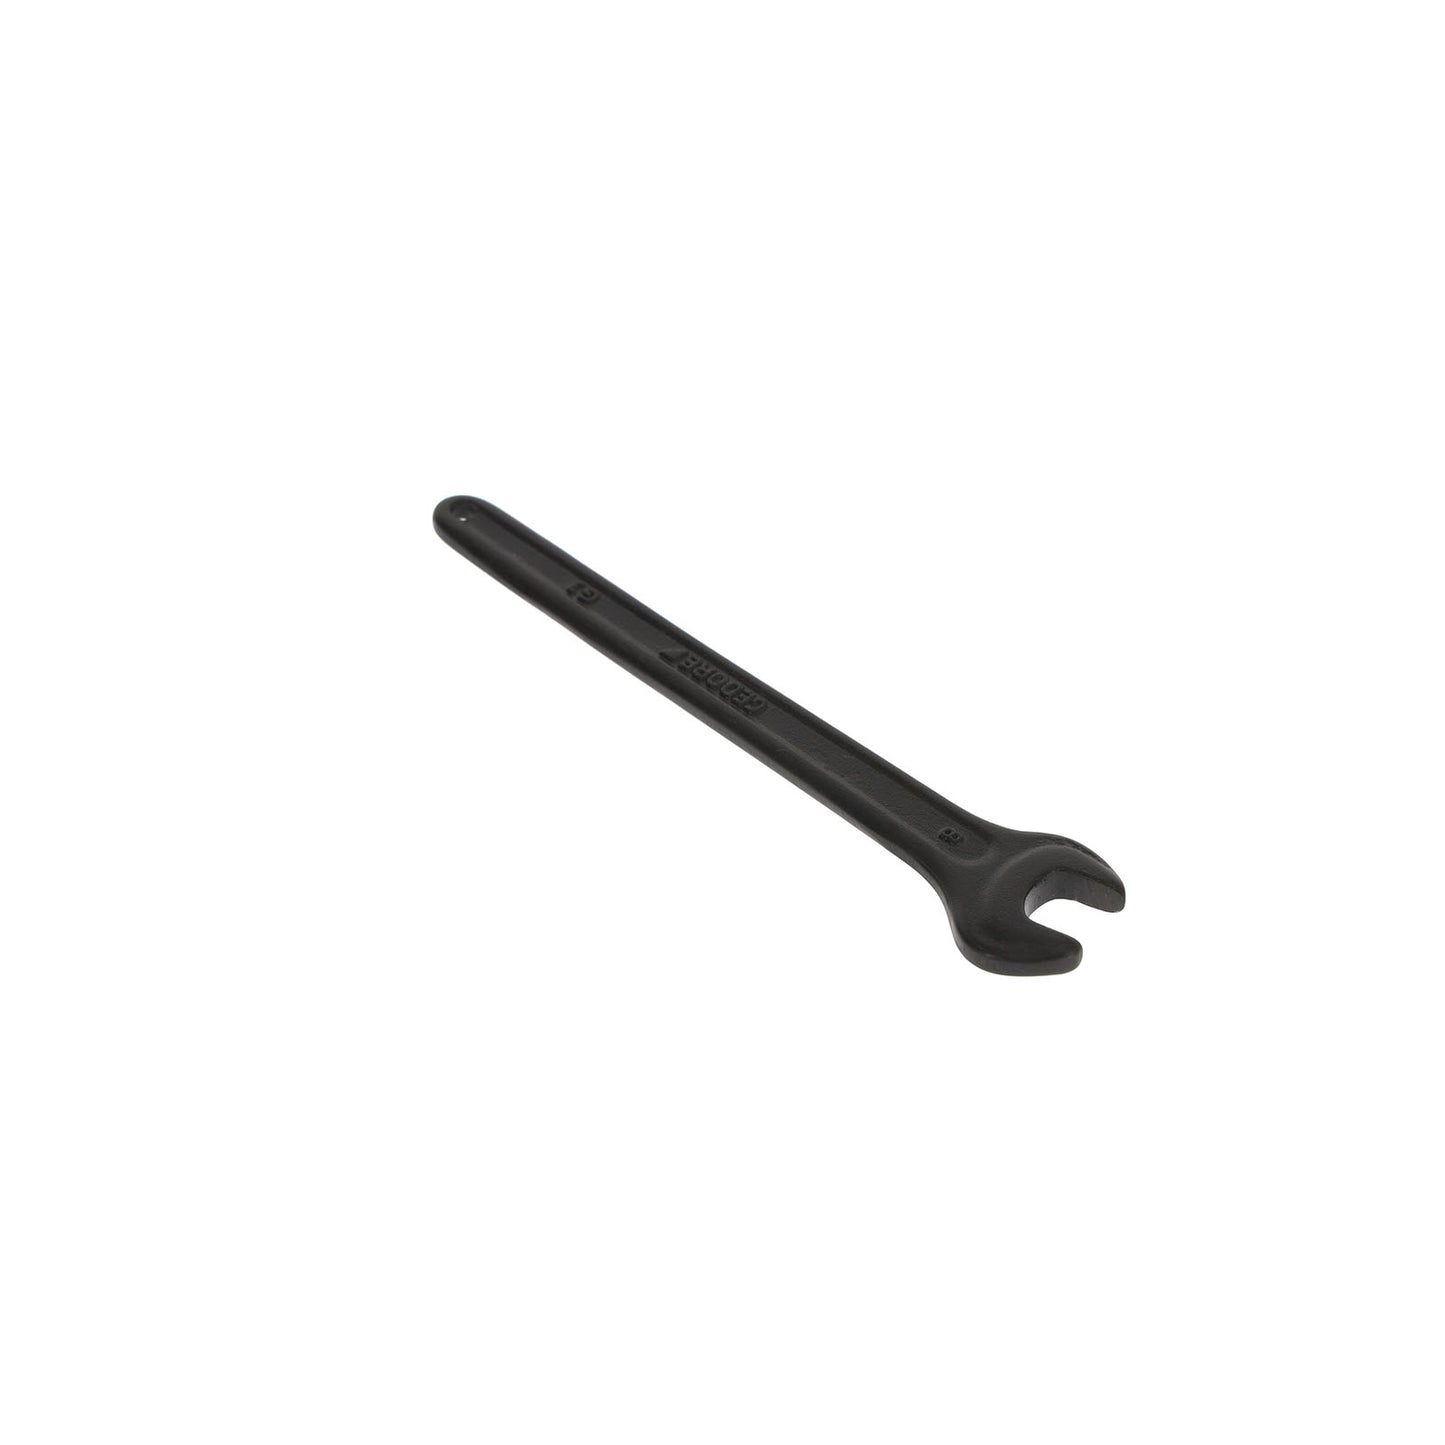 GEDORE 894 8 - 1 Open End Wrench, 8mm (6573870)